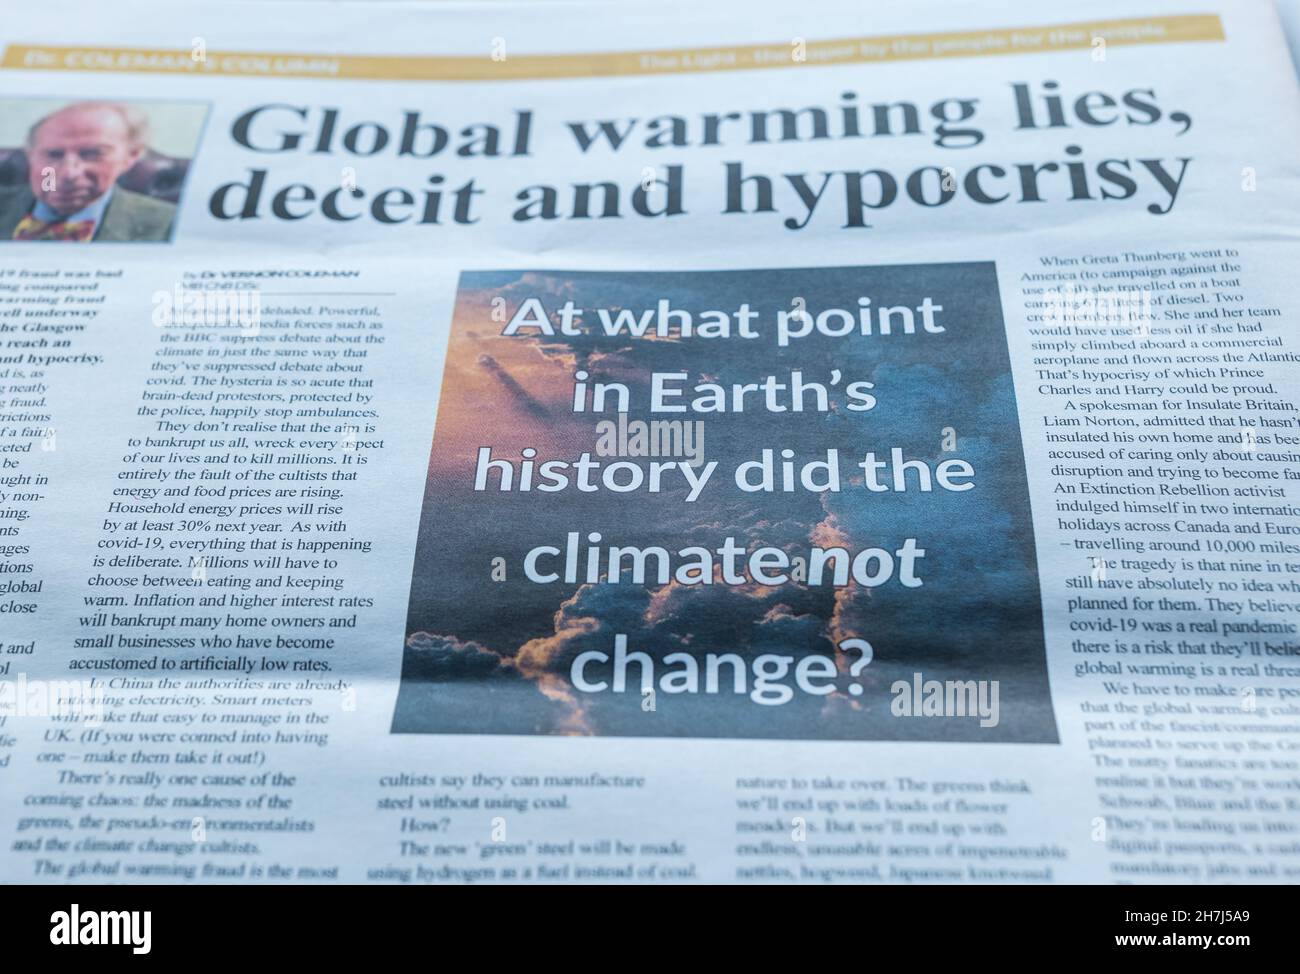 Dr Vernon Coleman column about climate change and global warming in conspiracy theory newspaper The Light published by Darren Smith Stock Photo